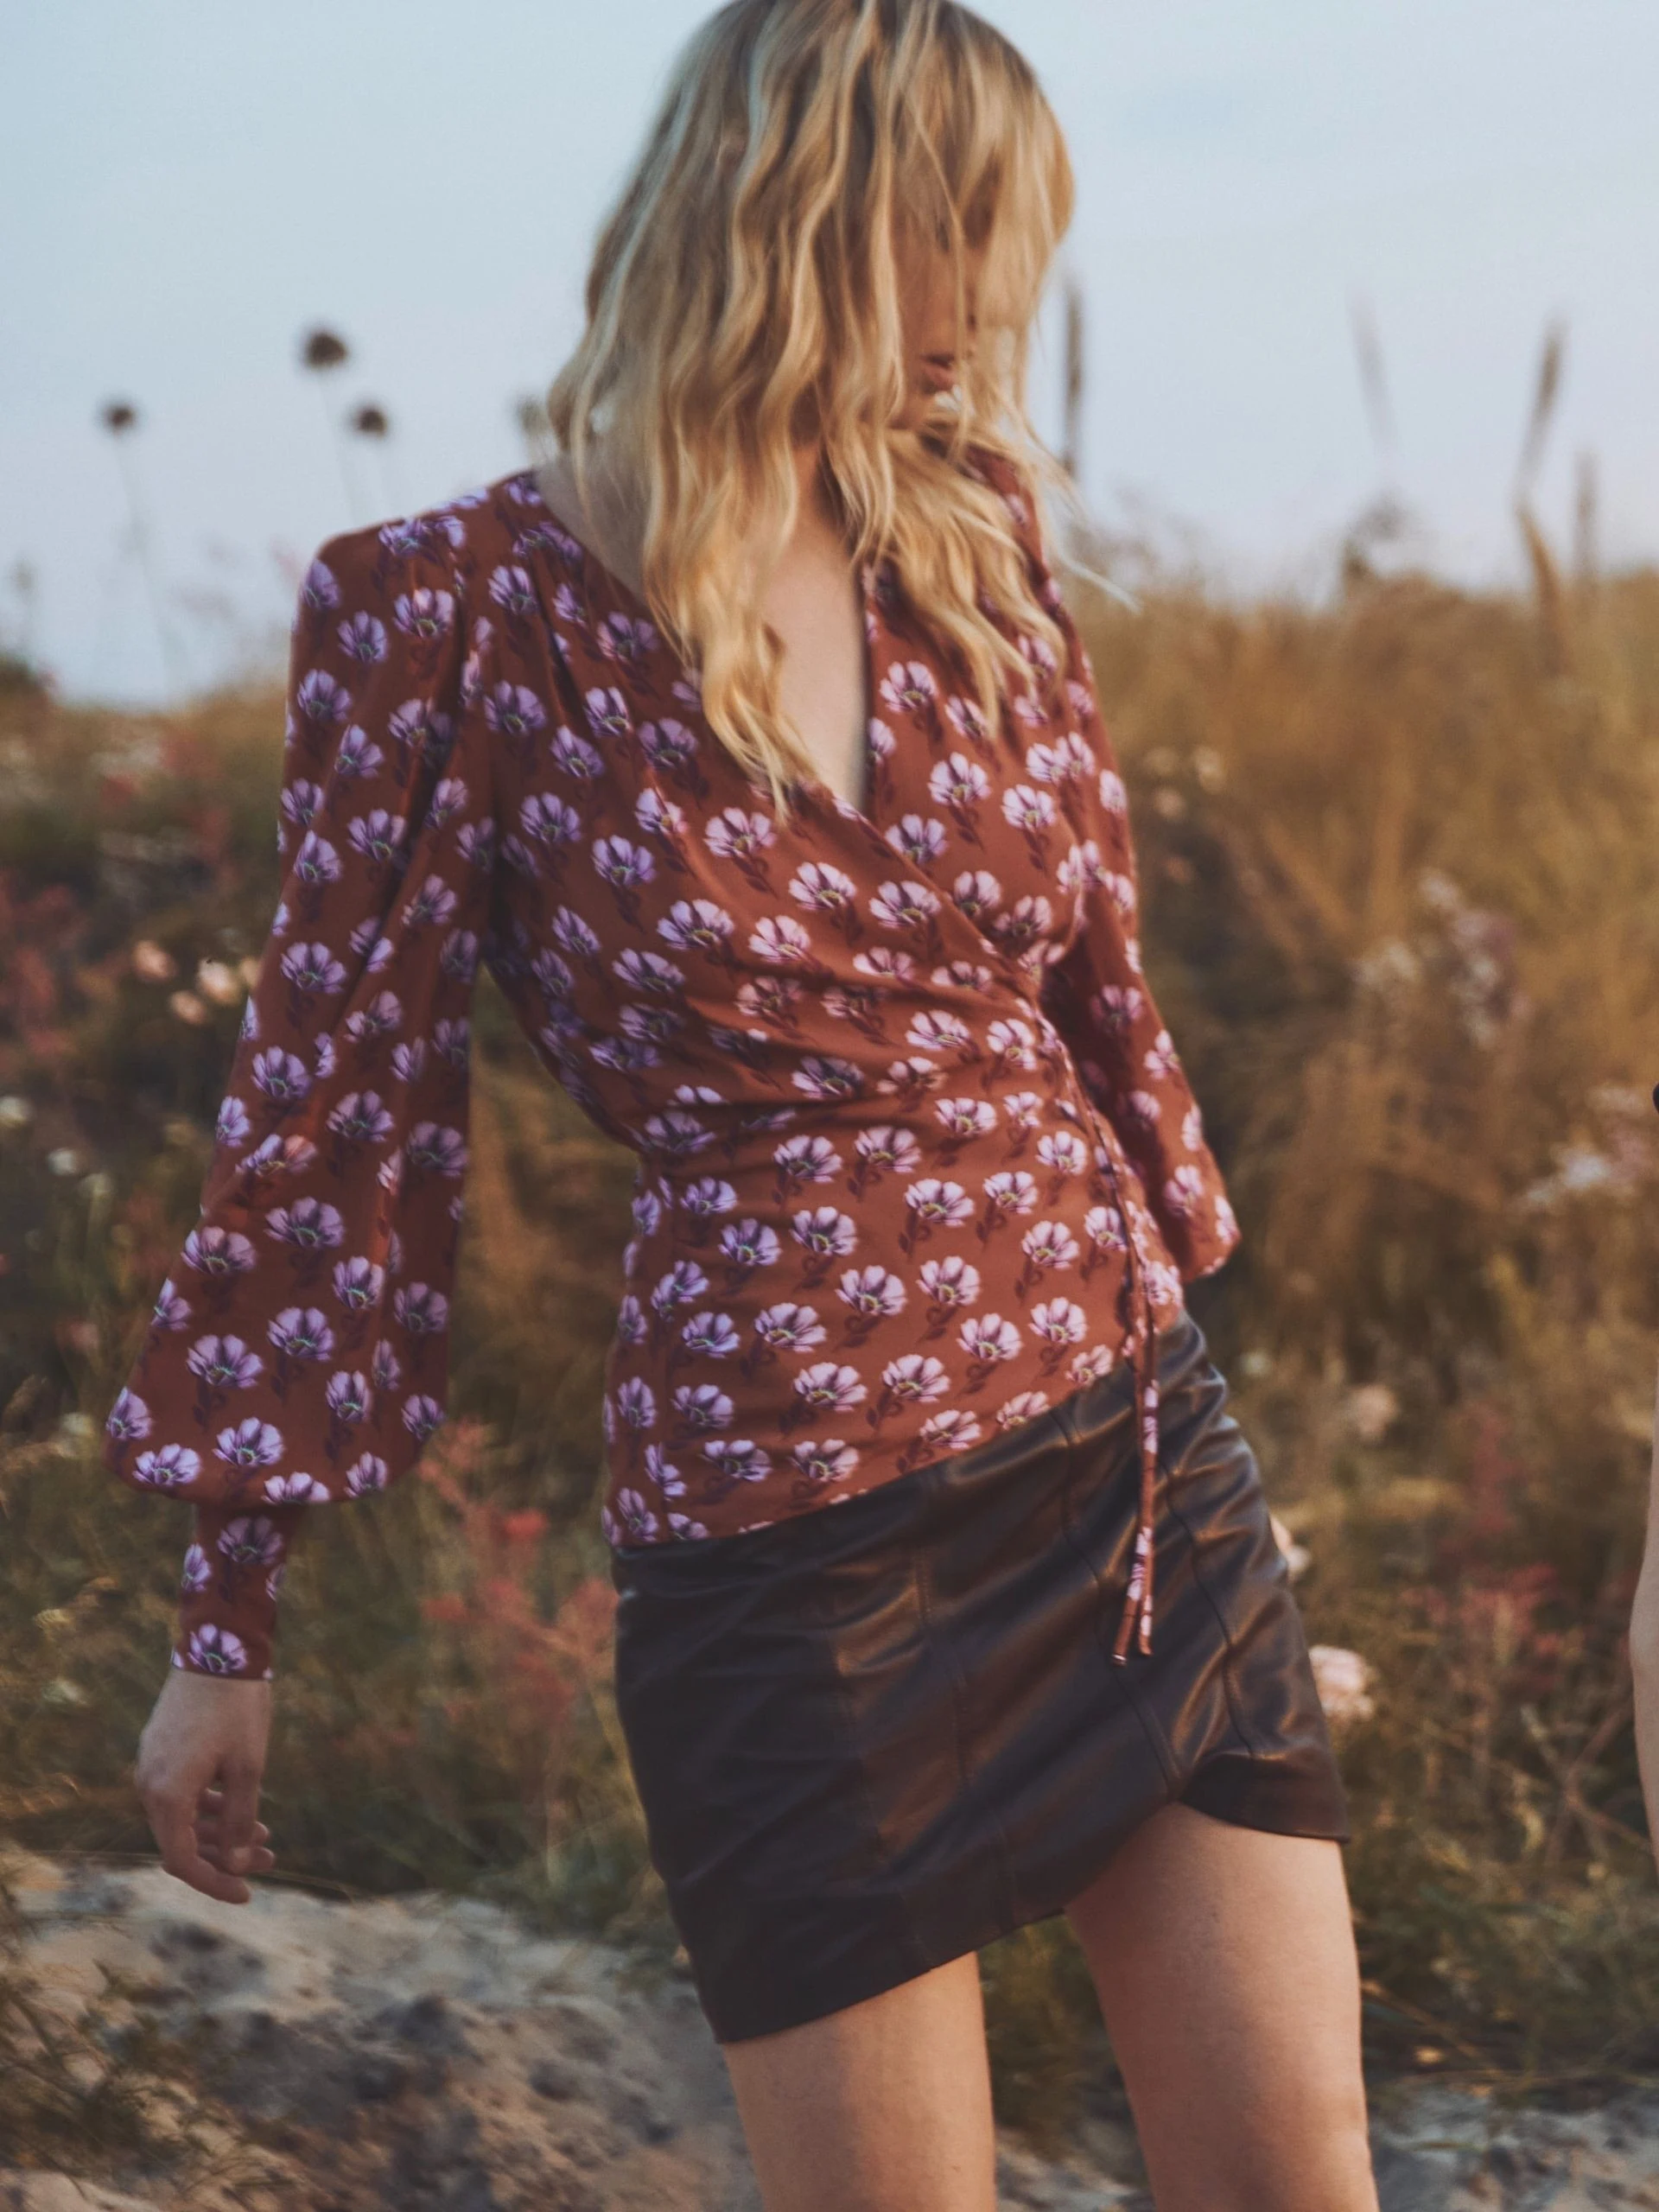 Brown floral blouse